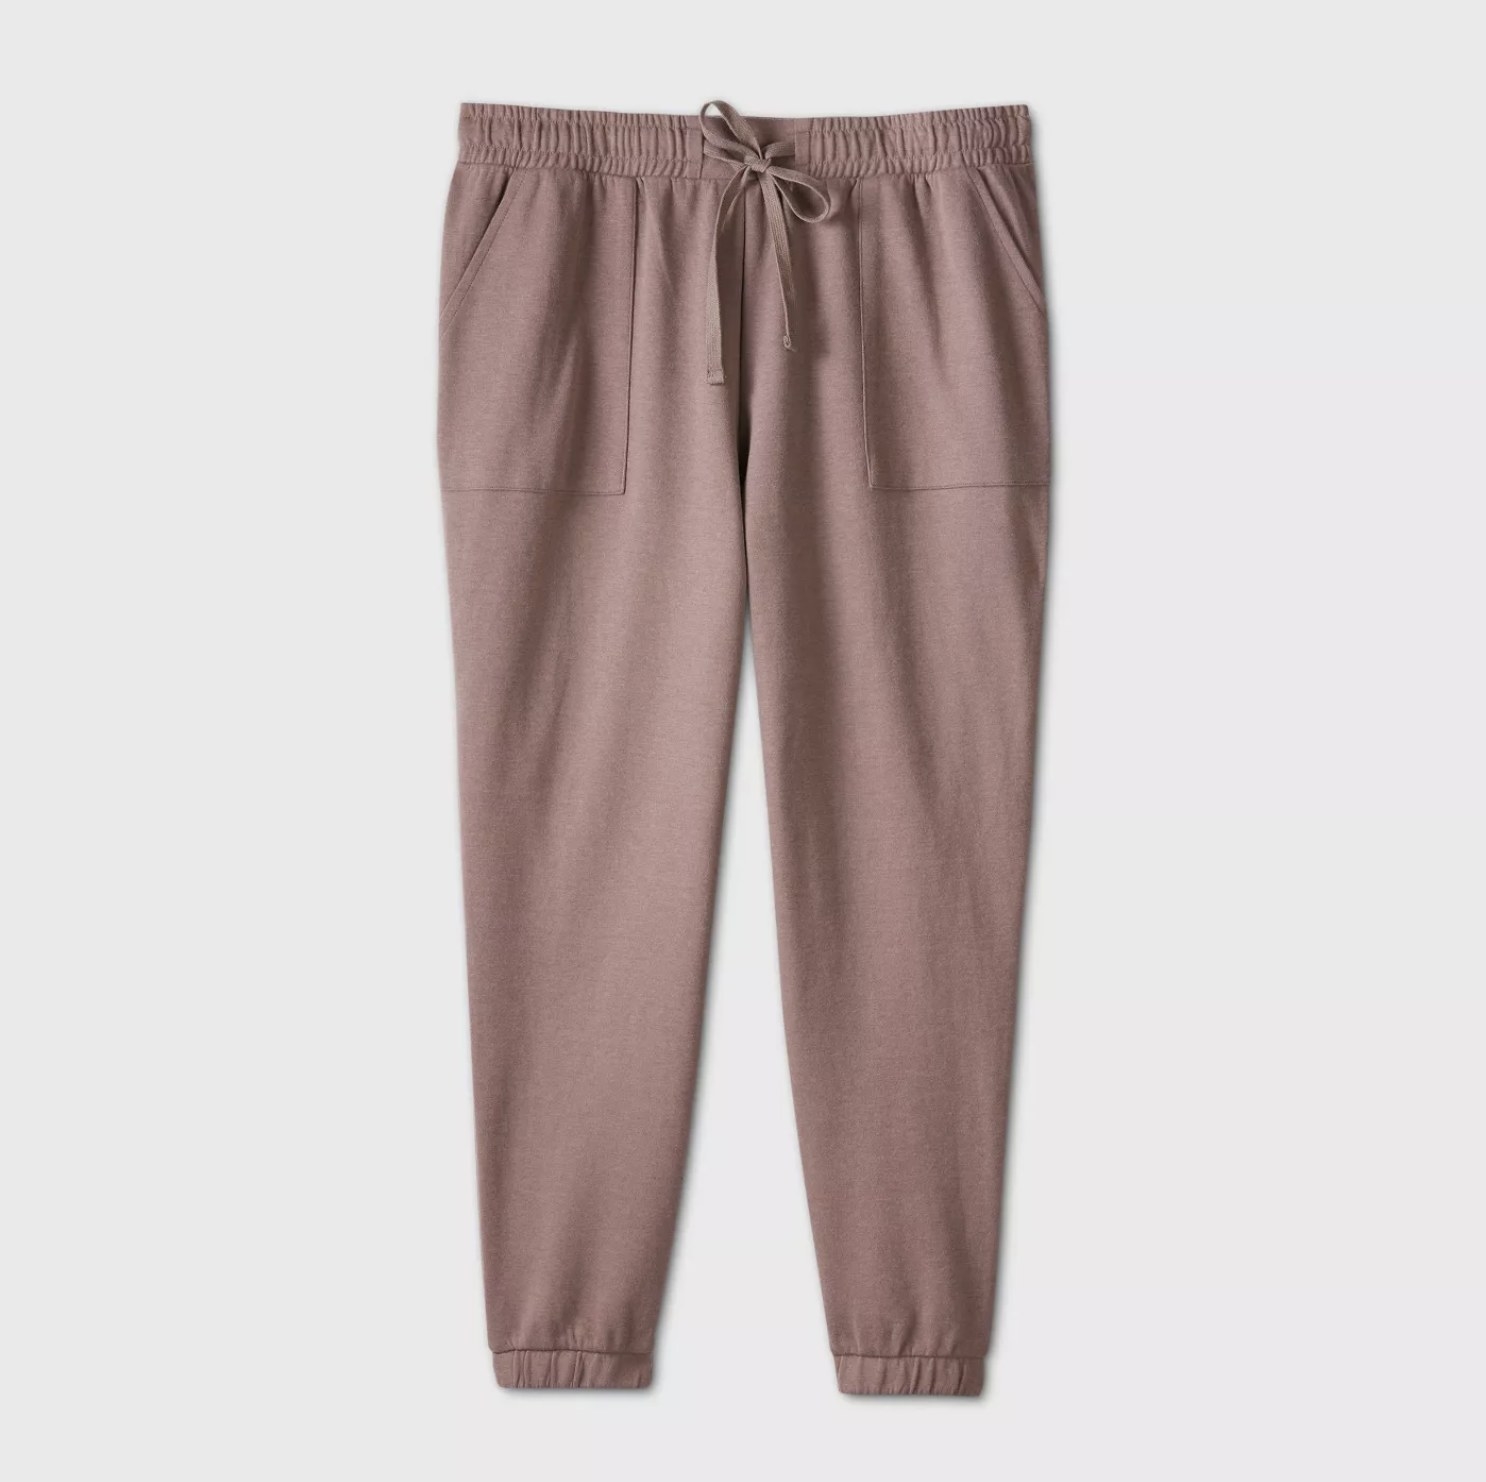 the joggers in brown 